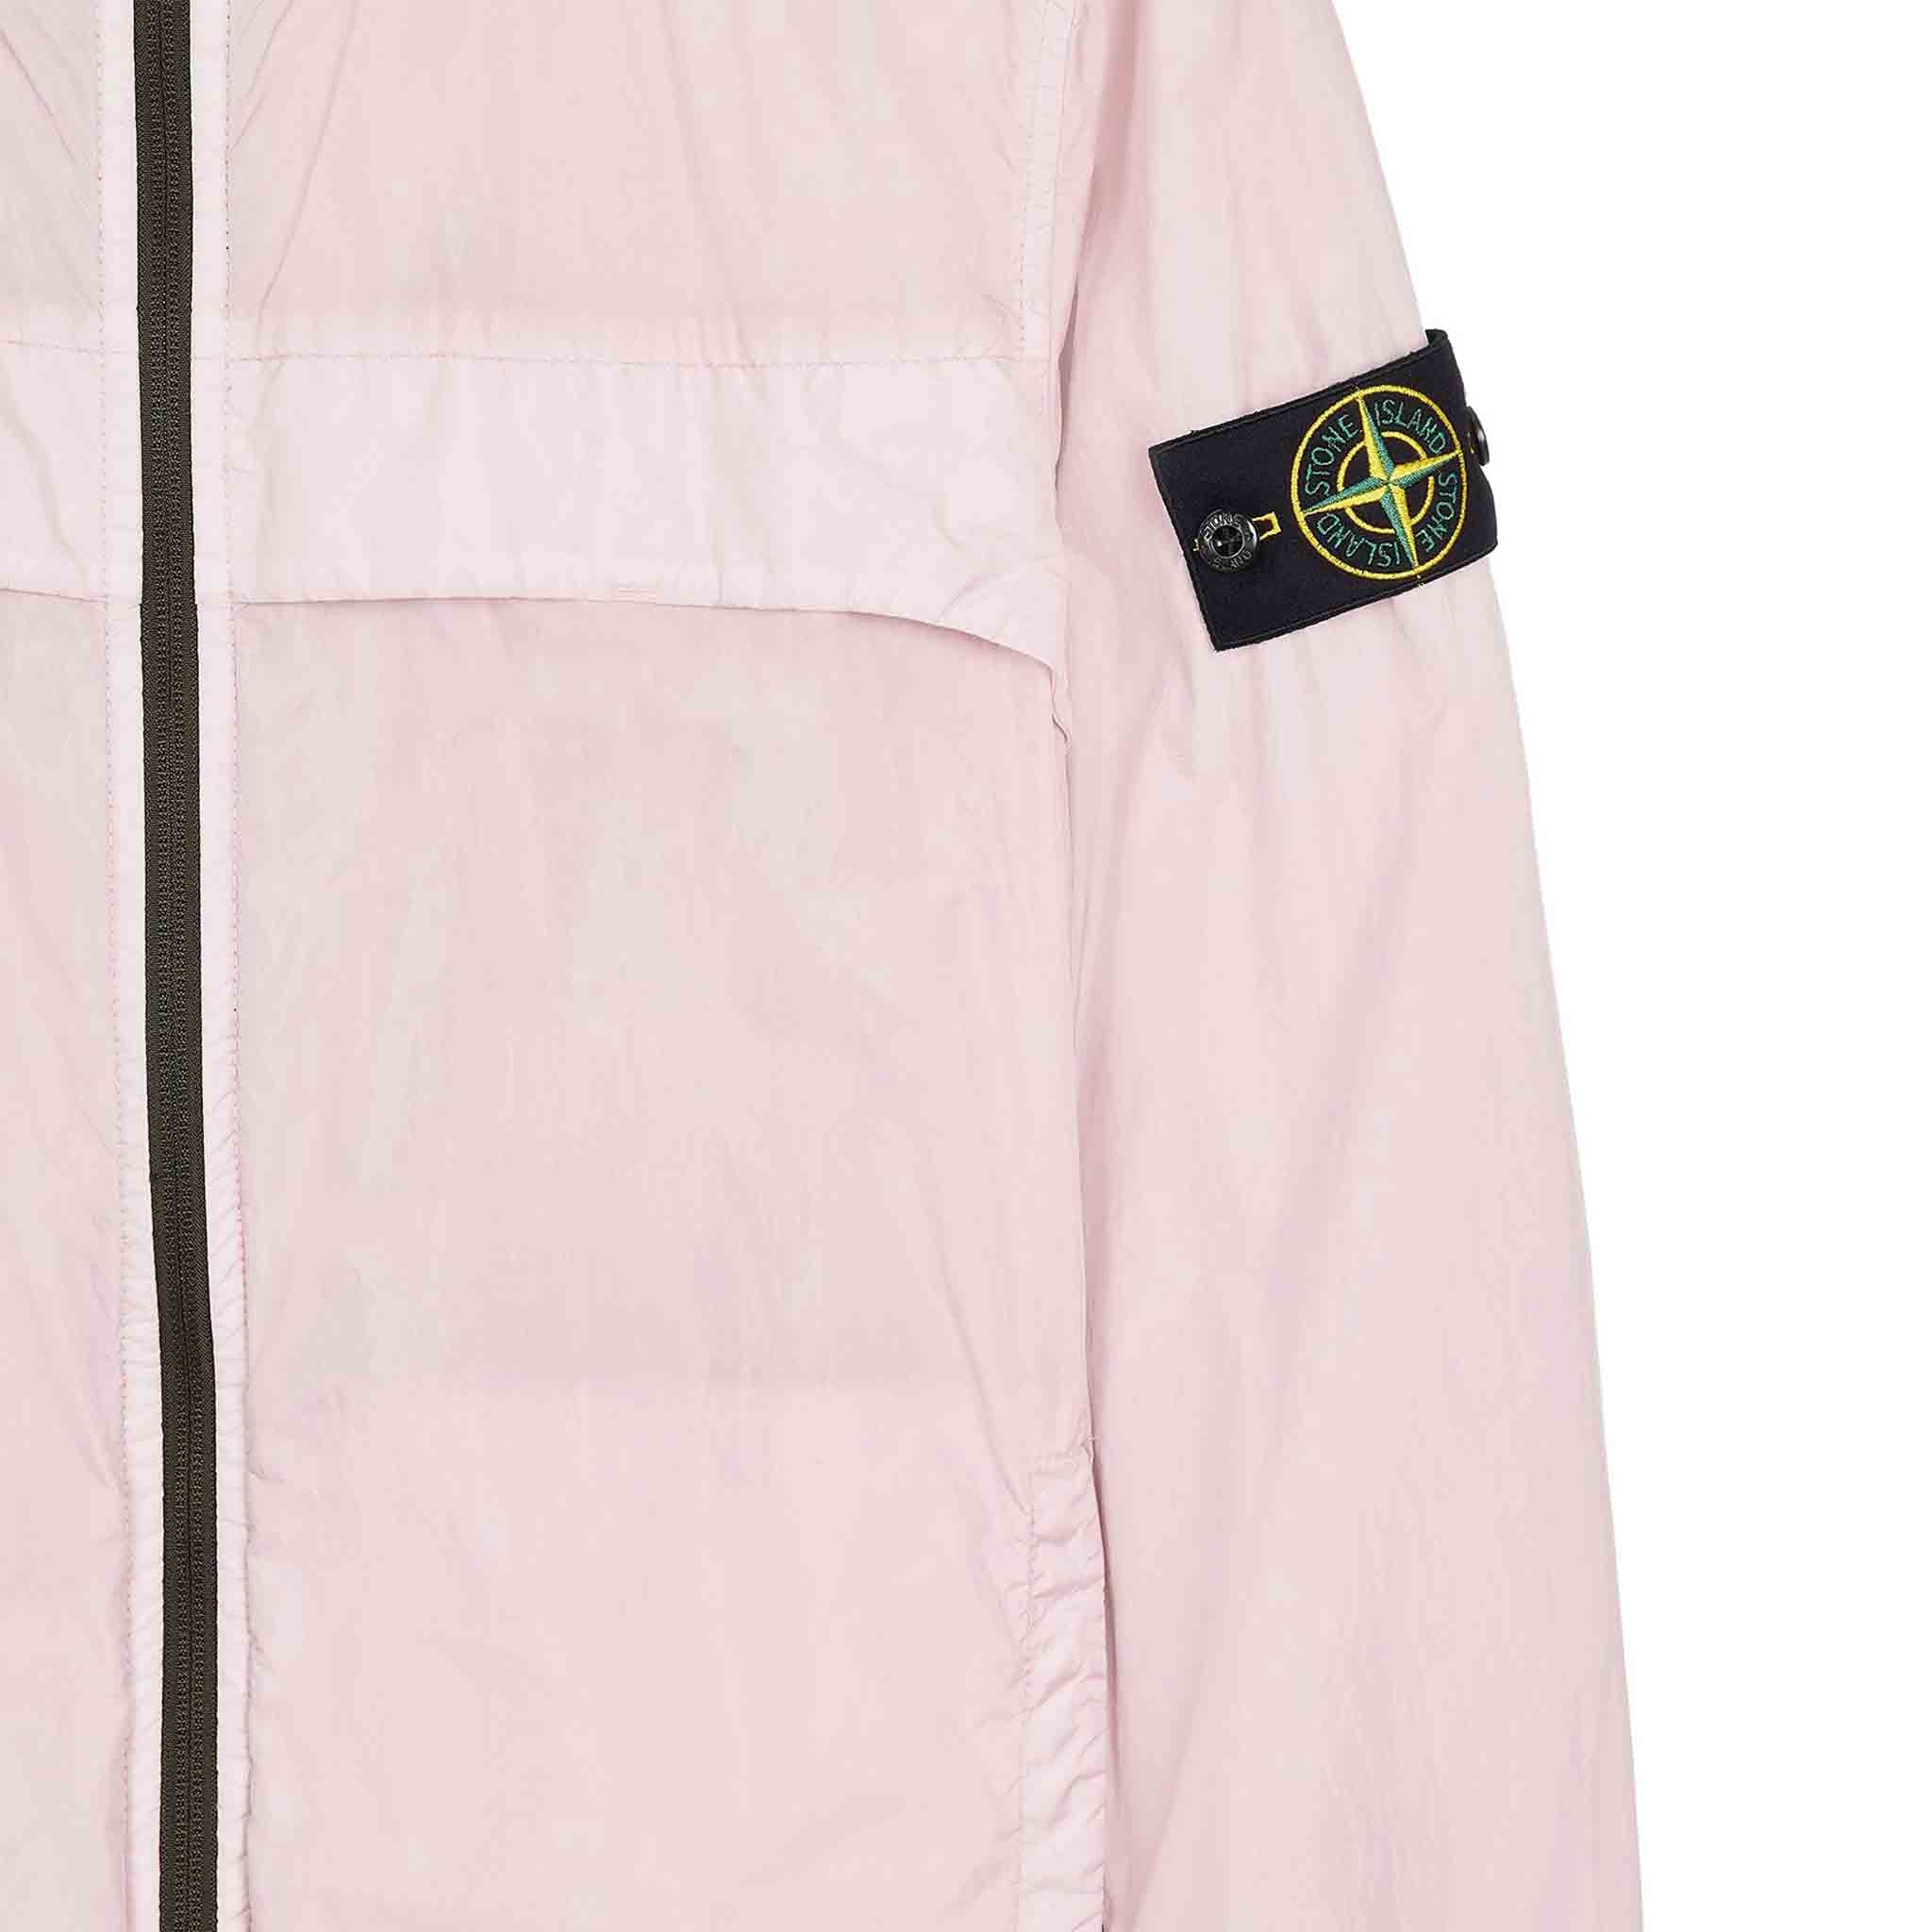 Stone Island Garment Dyed Crinkle Reps R-NY Overshirt in Pink